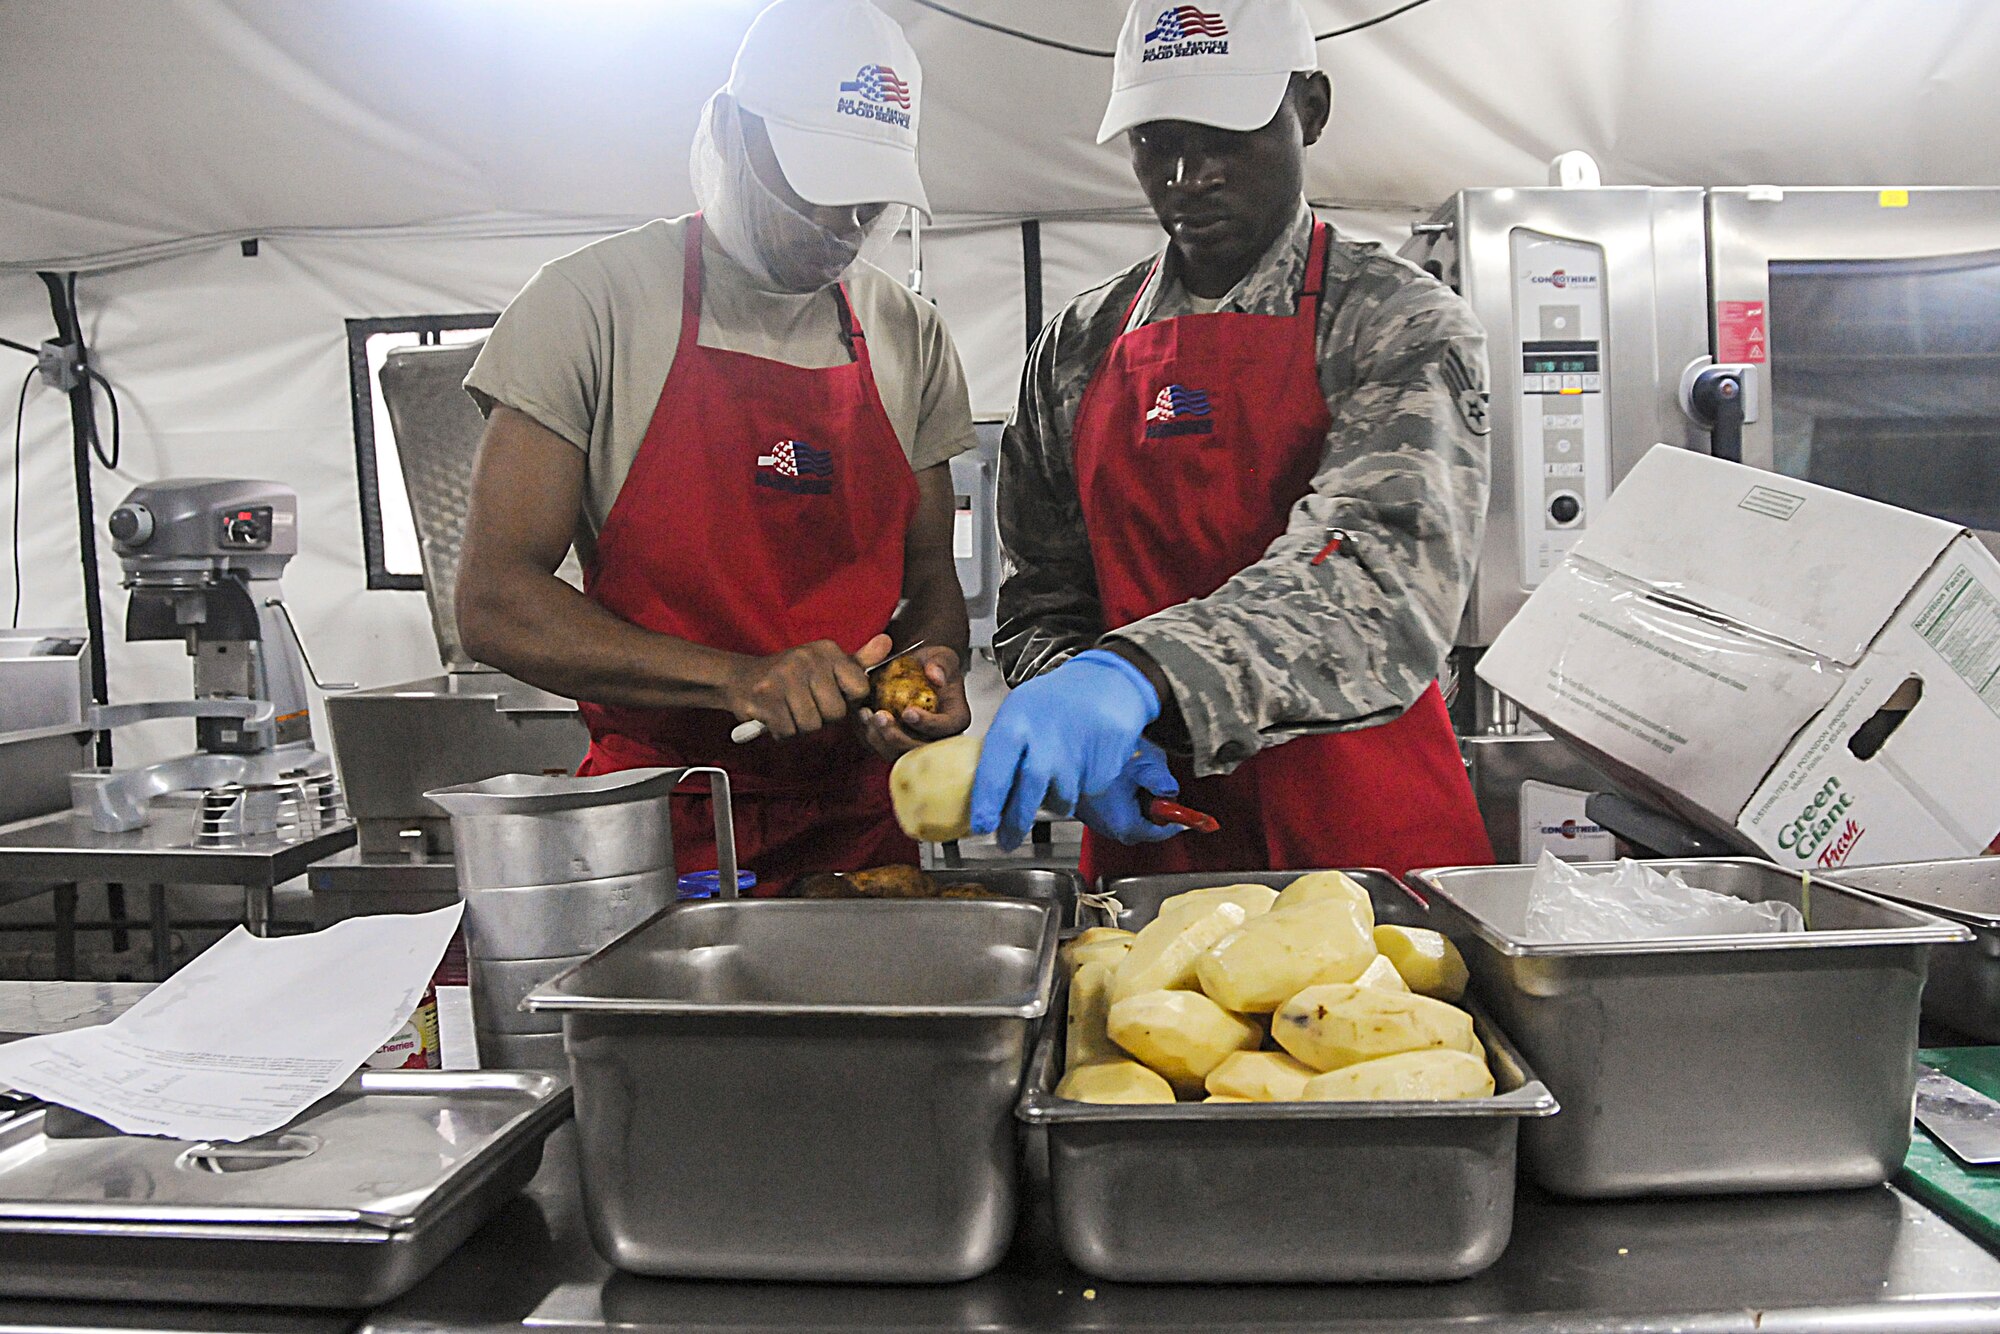 Participants peel potatoes during this year's Hennessy competition held at the Force Support Silver Flag training facility on Dobbins Air Reserve Base Feb. 9-12. Each year a trophy is awarded to teams representing the best food service programs in the Air Force and is based on the entire scope of an installation's food service program. (U.S. Air Force photo/Senior Airman Justin Clayvon)